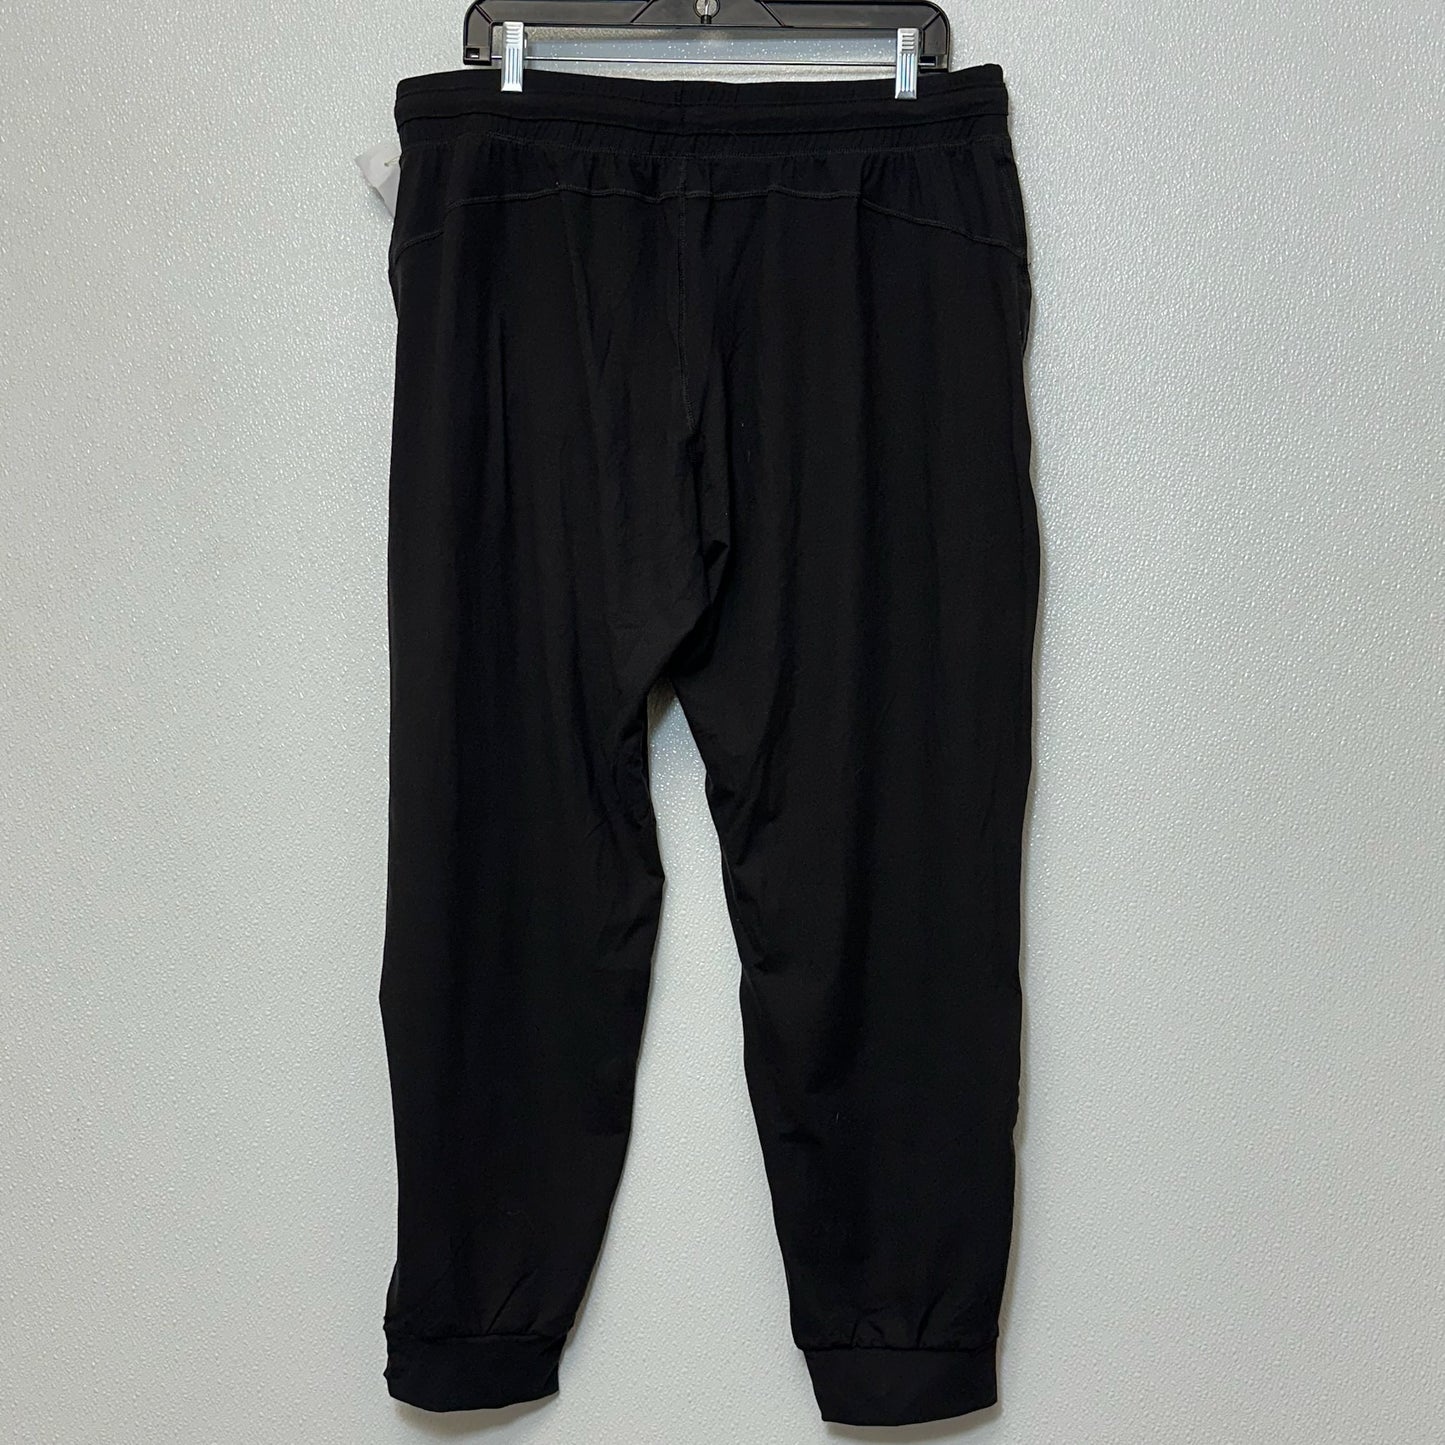 Athletic Pants By Clothes Mentor  Size: 3x